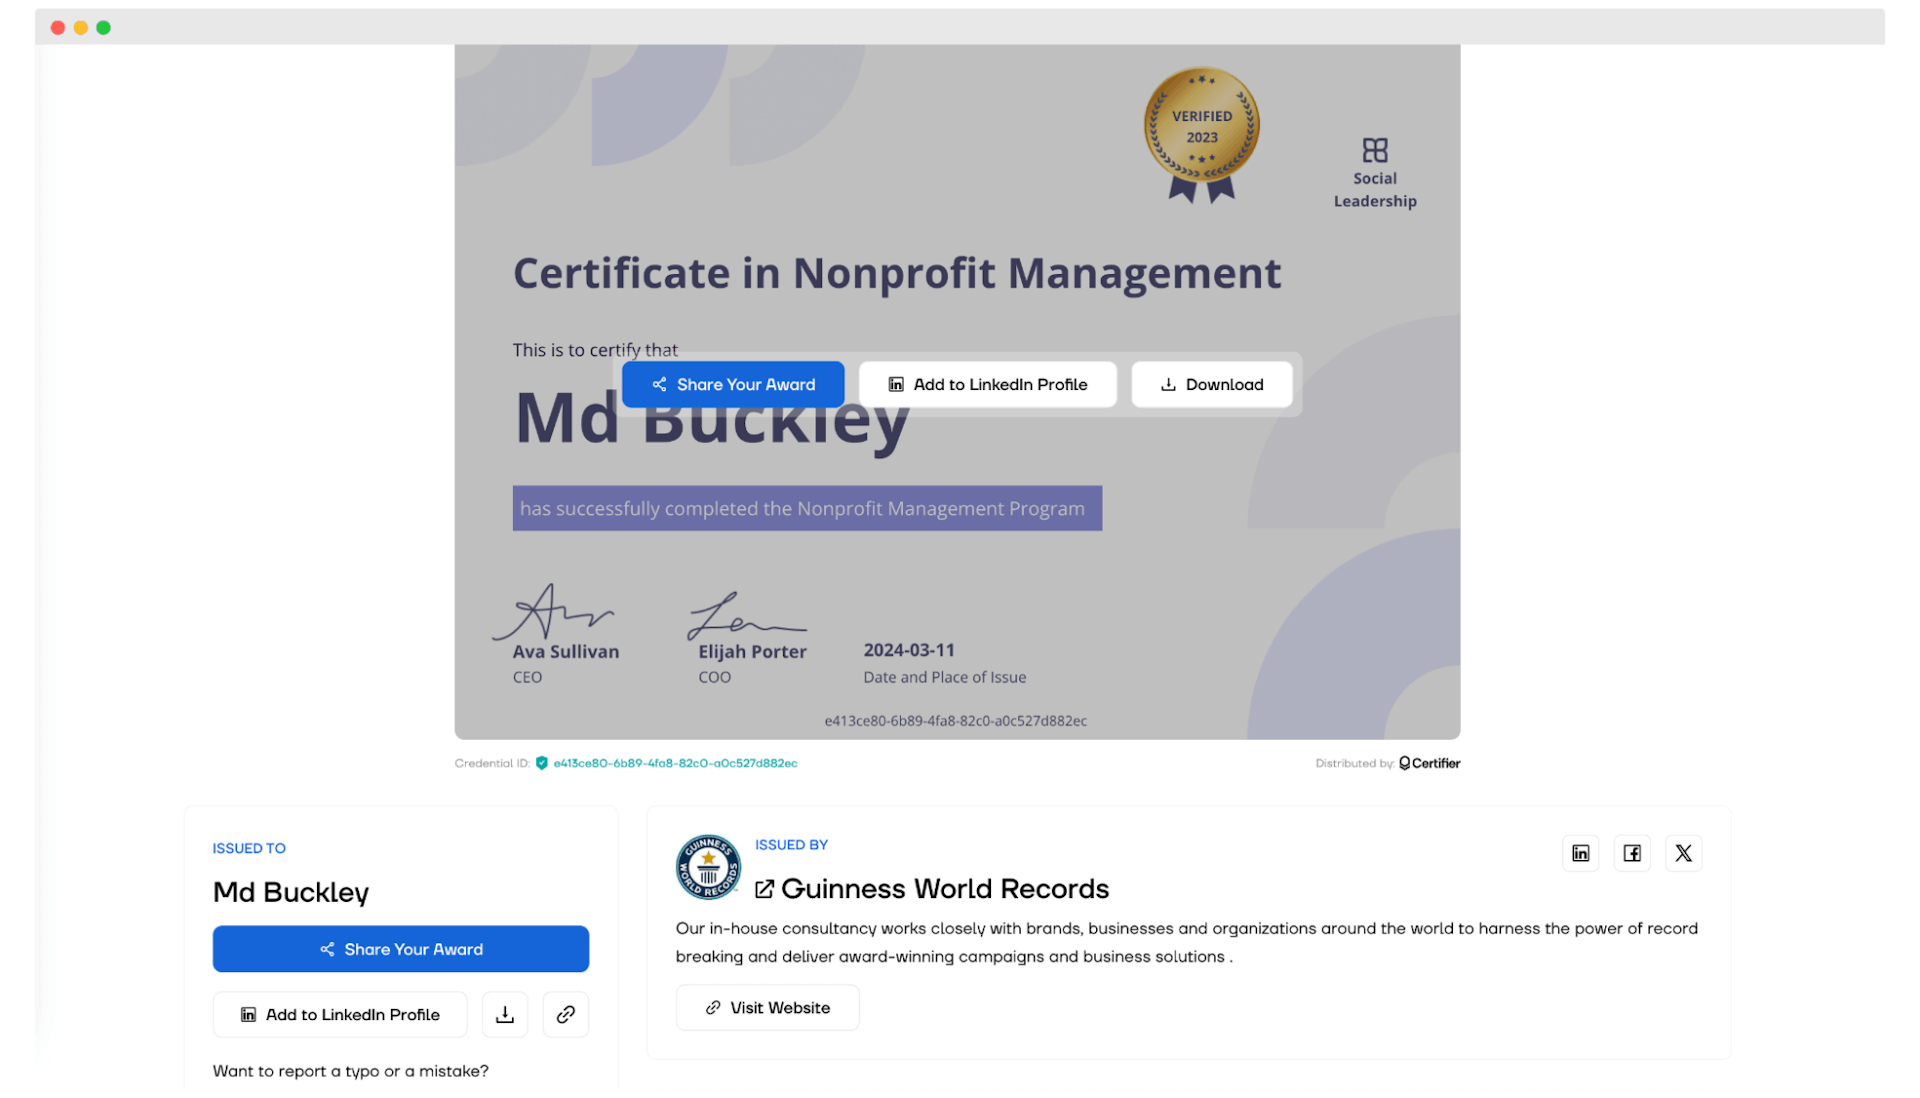 The verification page example that the recipient can access via the QR code on the custom certificate.